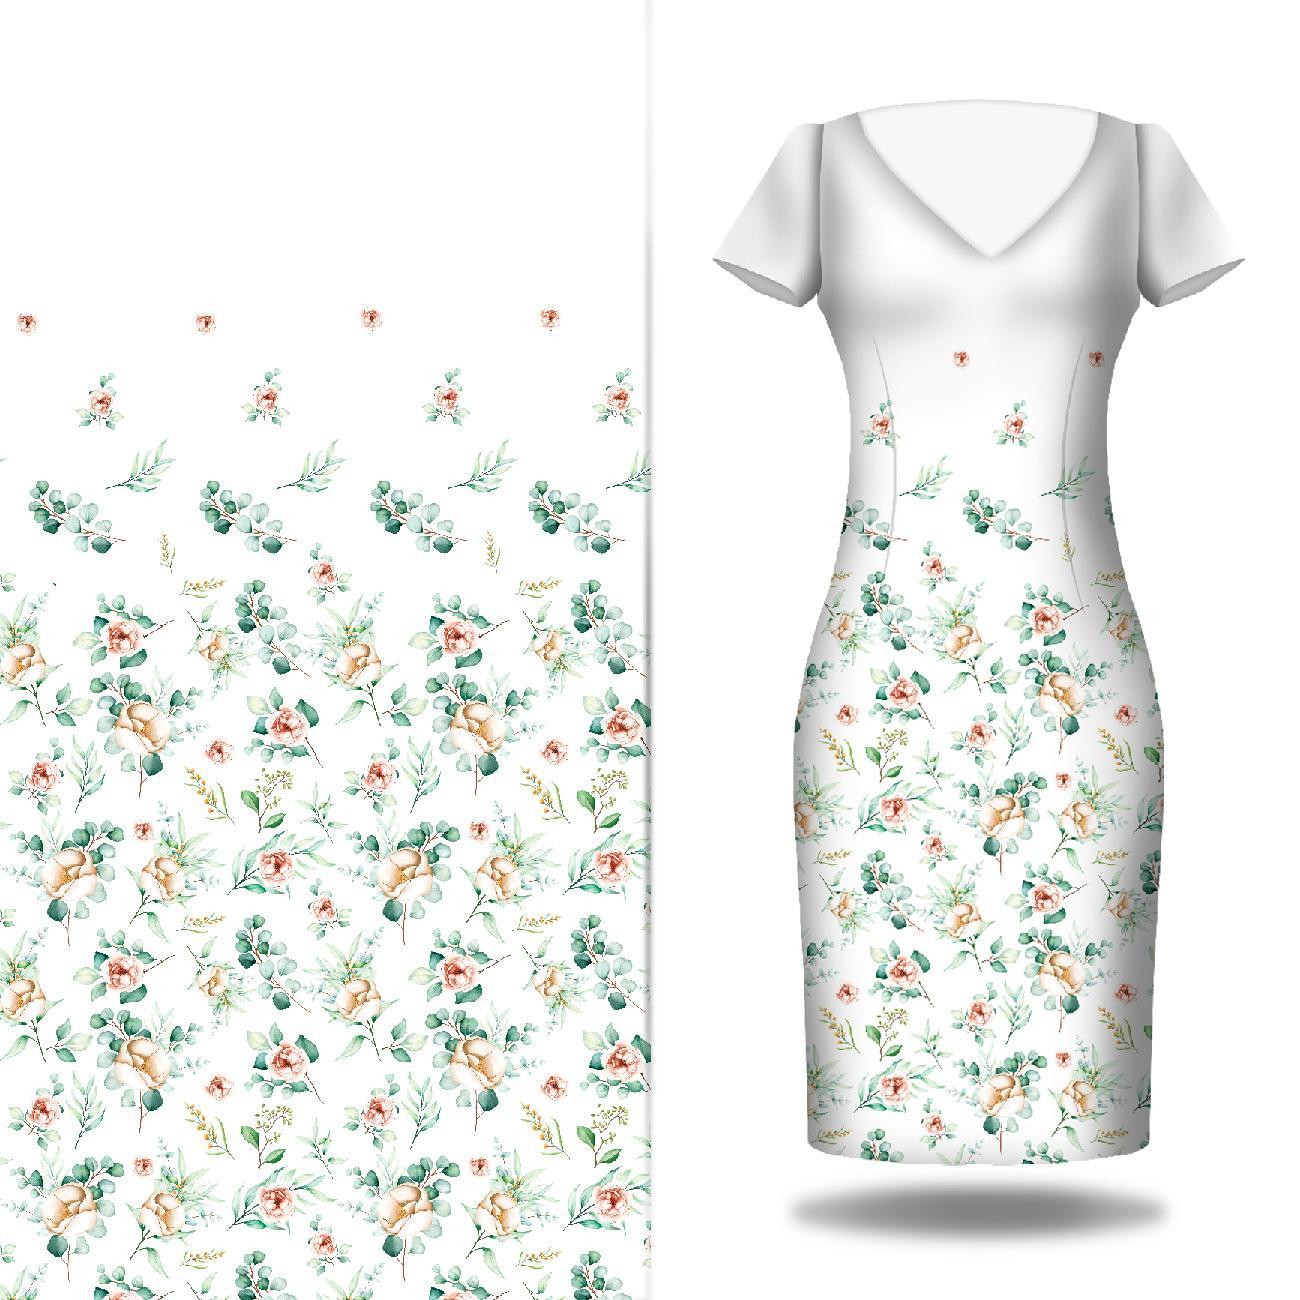 ROSES AND LEAVES PAT. 2  - dress panel Cotton muslin